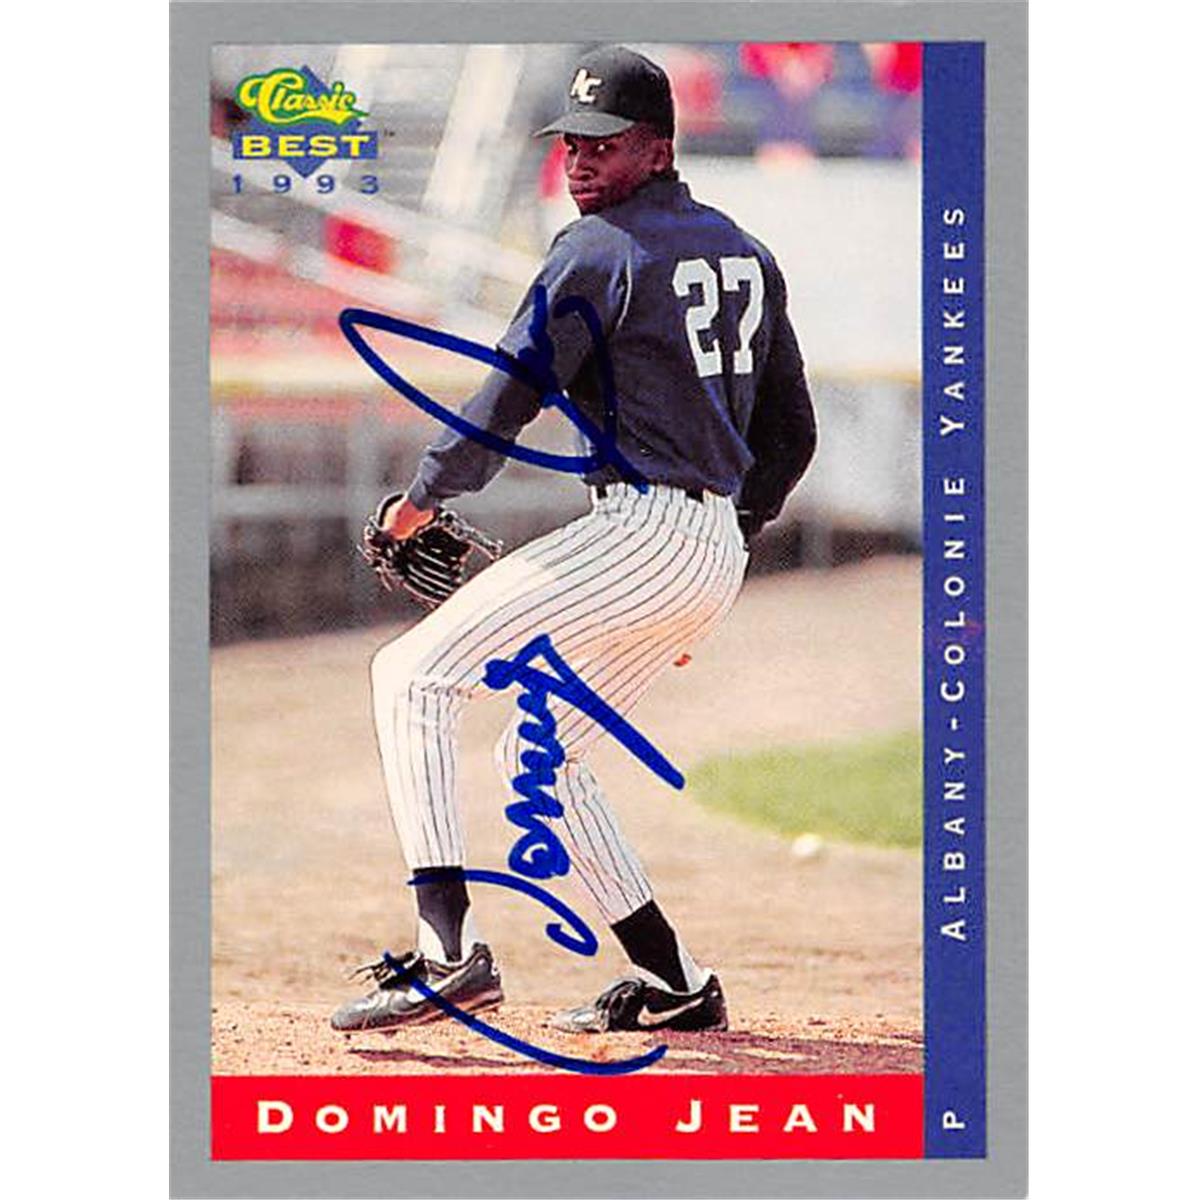 Autograph Warehouse 343845 Domingo Jean Autographed Baseball Card - New York Yankees, FT 1993 Classic Best No. 76 Rookie